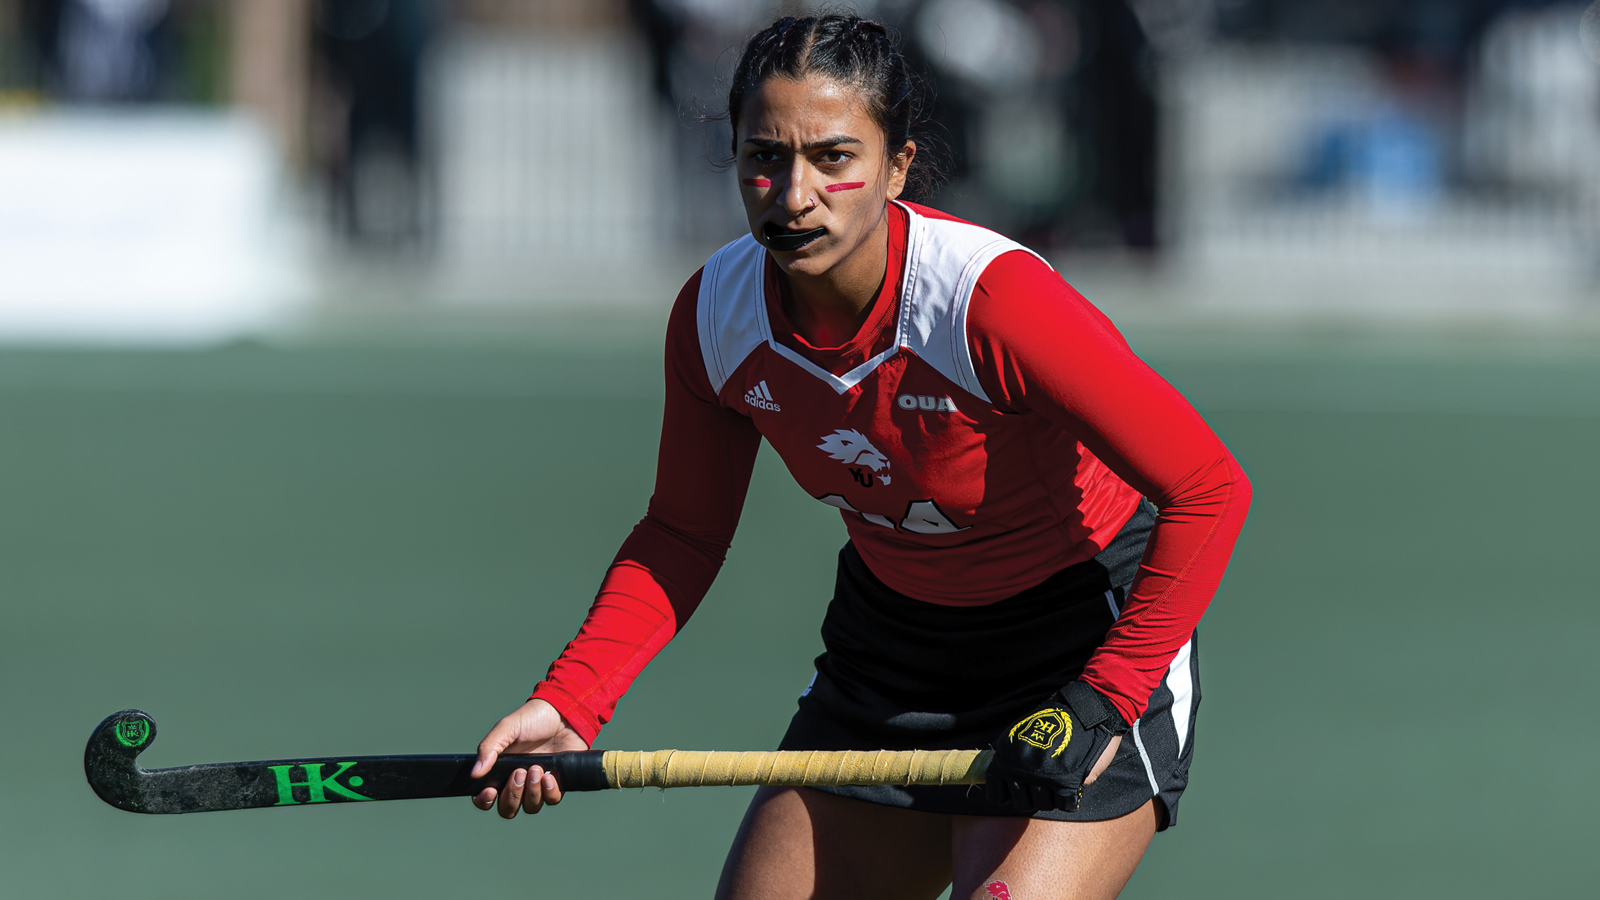 York women's field hockey player in uniform and on the field during a game, looking toward the play while holding her stick horizontally at waist level